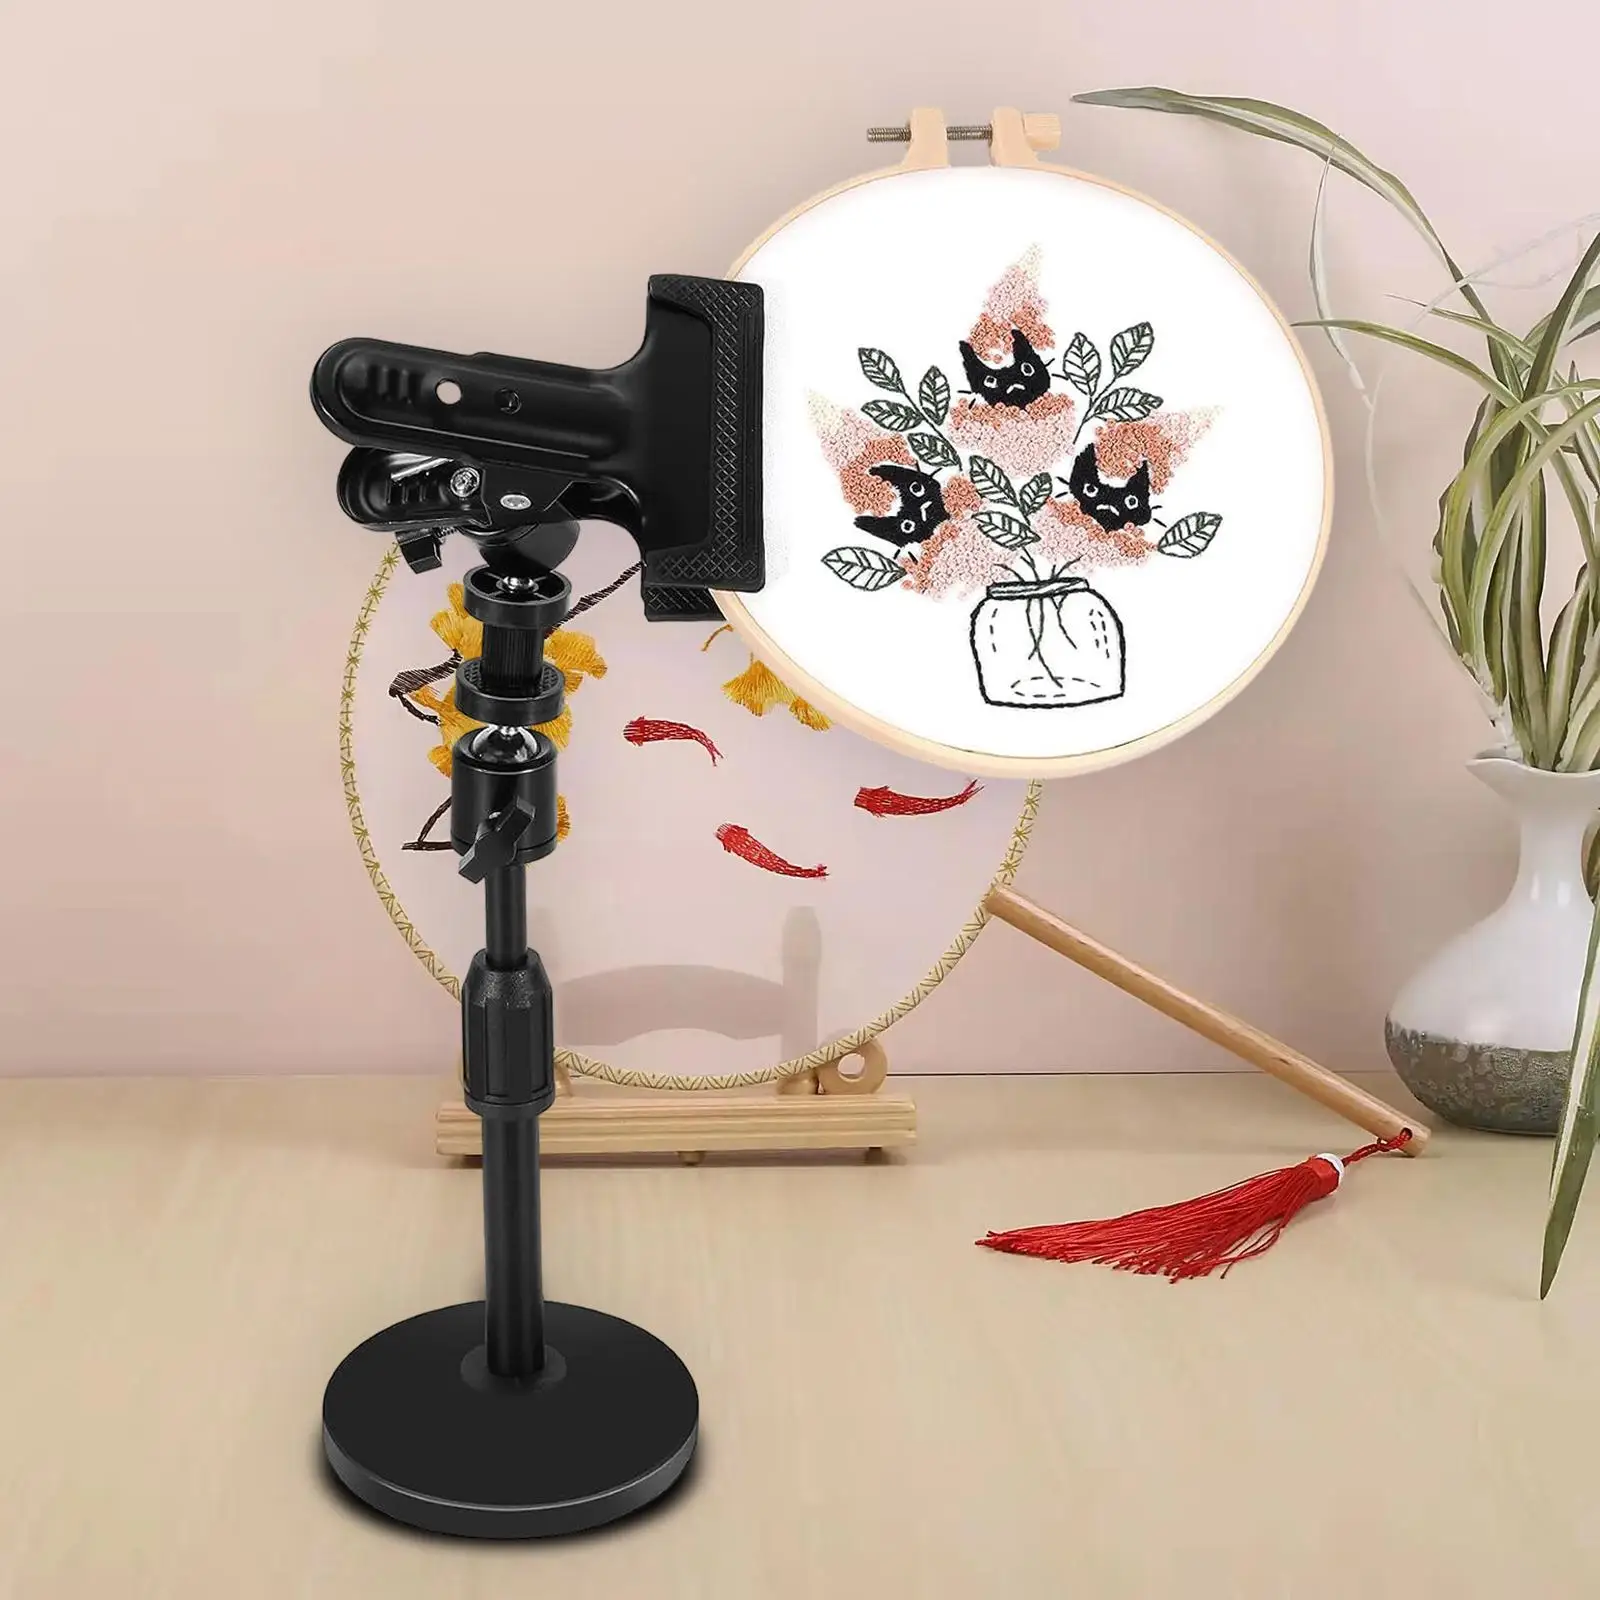 Adjustable Height Embroidery Hoop Stand Rotated Multifunctional Durable Embroidery Frame Holder Cross Stitch Clip